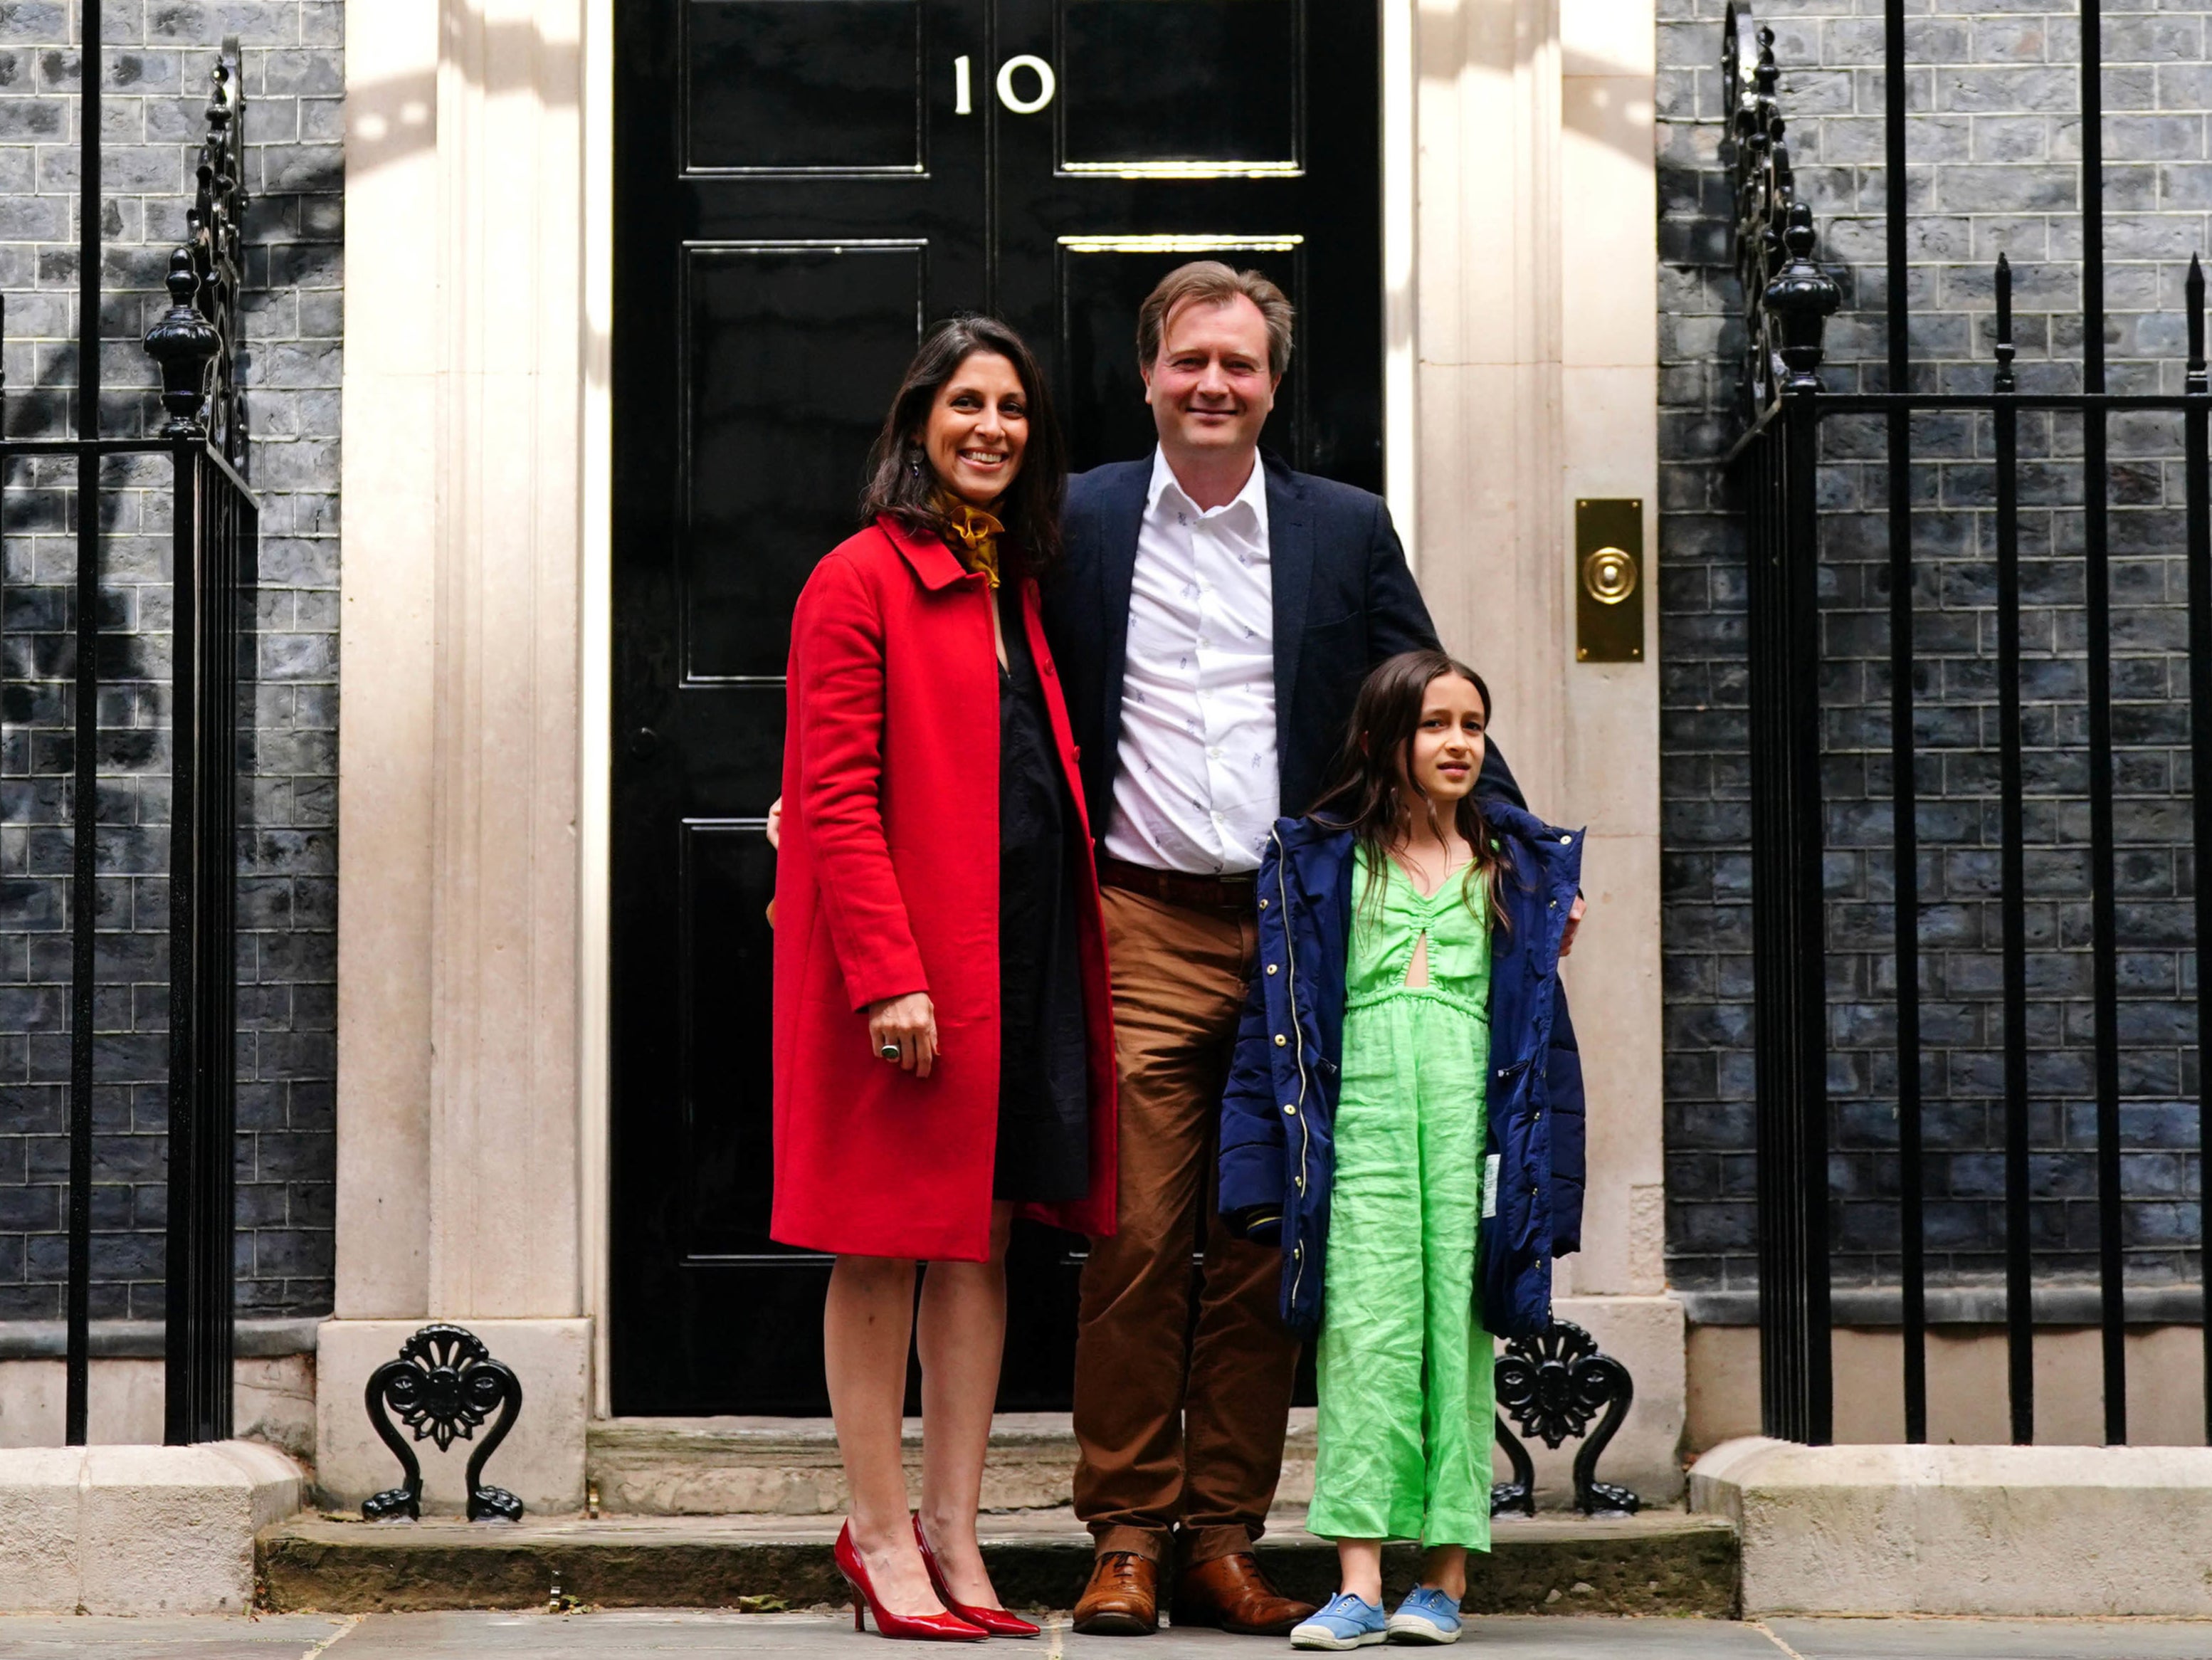 Nazanin Zaghari-Ratcliffe with her husband Richard Ratcliffe and daughter Gabriella arriving in Downing Street on May 13